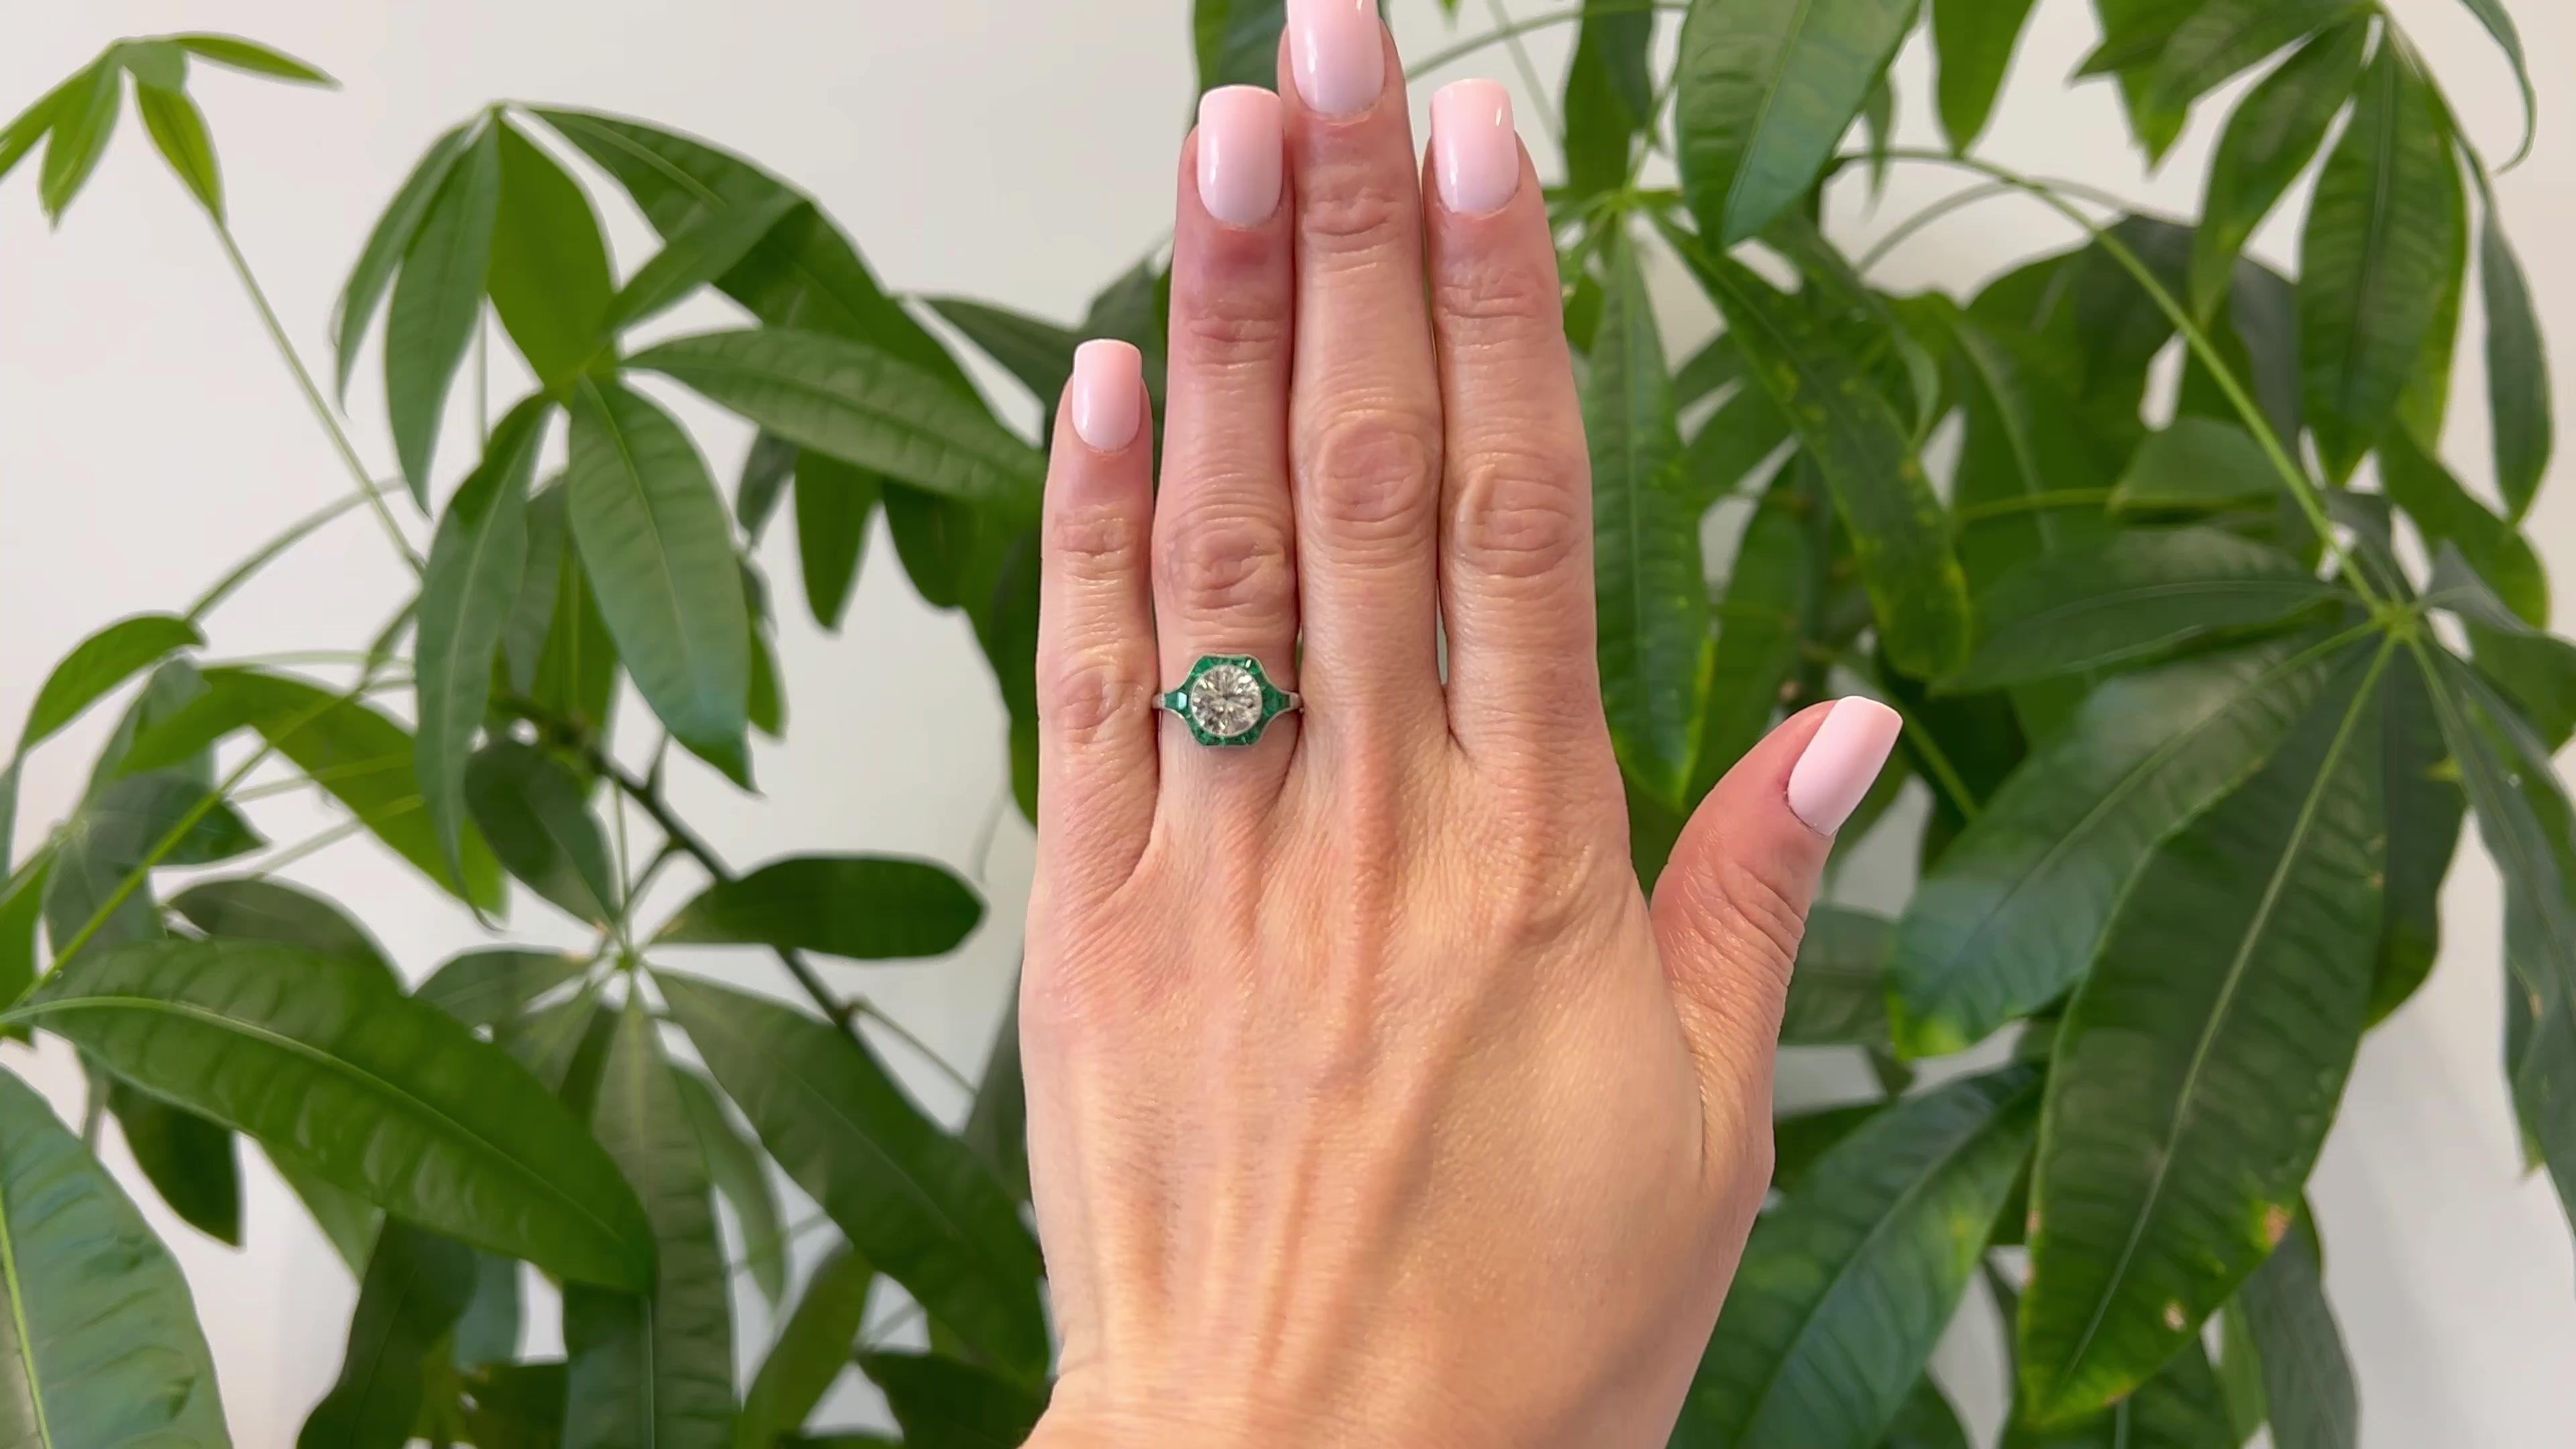 One Art Deco Inspired 2.09 Carat Round Brilliant Cut Diamond and Emerald Platinum Ring. Featuring one round brilliant cut diamond of 2.09 carats, graded M color, VS1 clarity. Accented by 16 calibré cut emeralds with a total weight of approximately